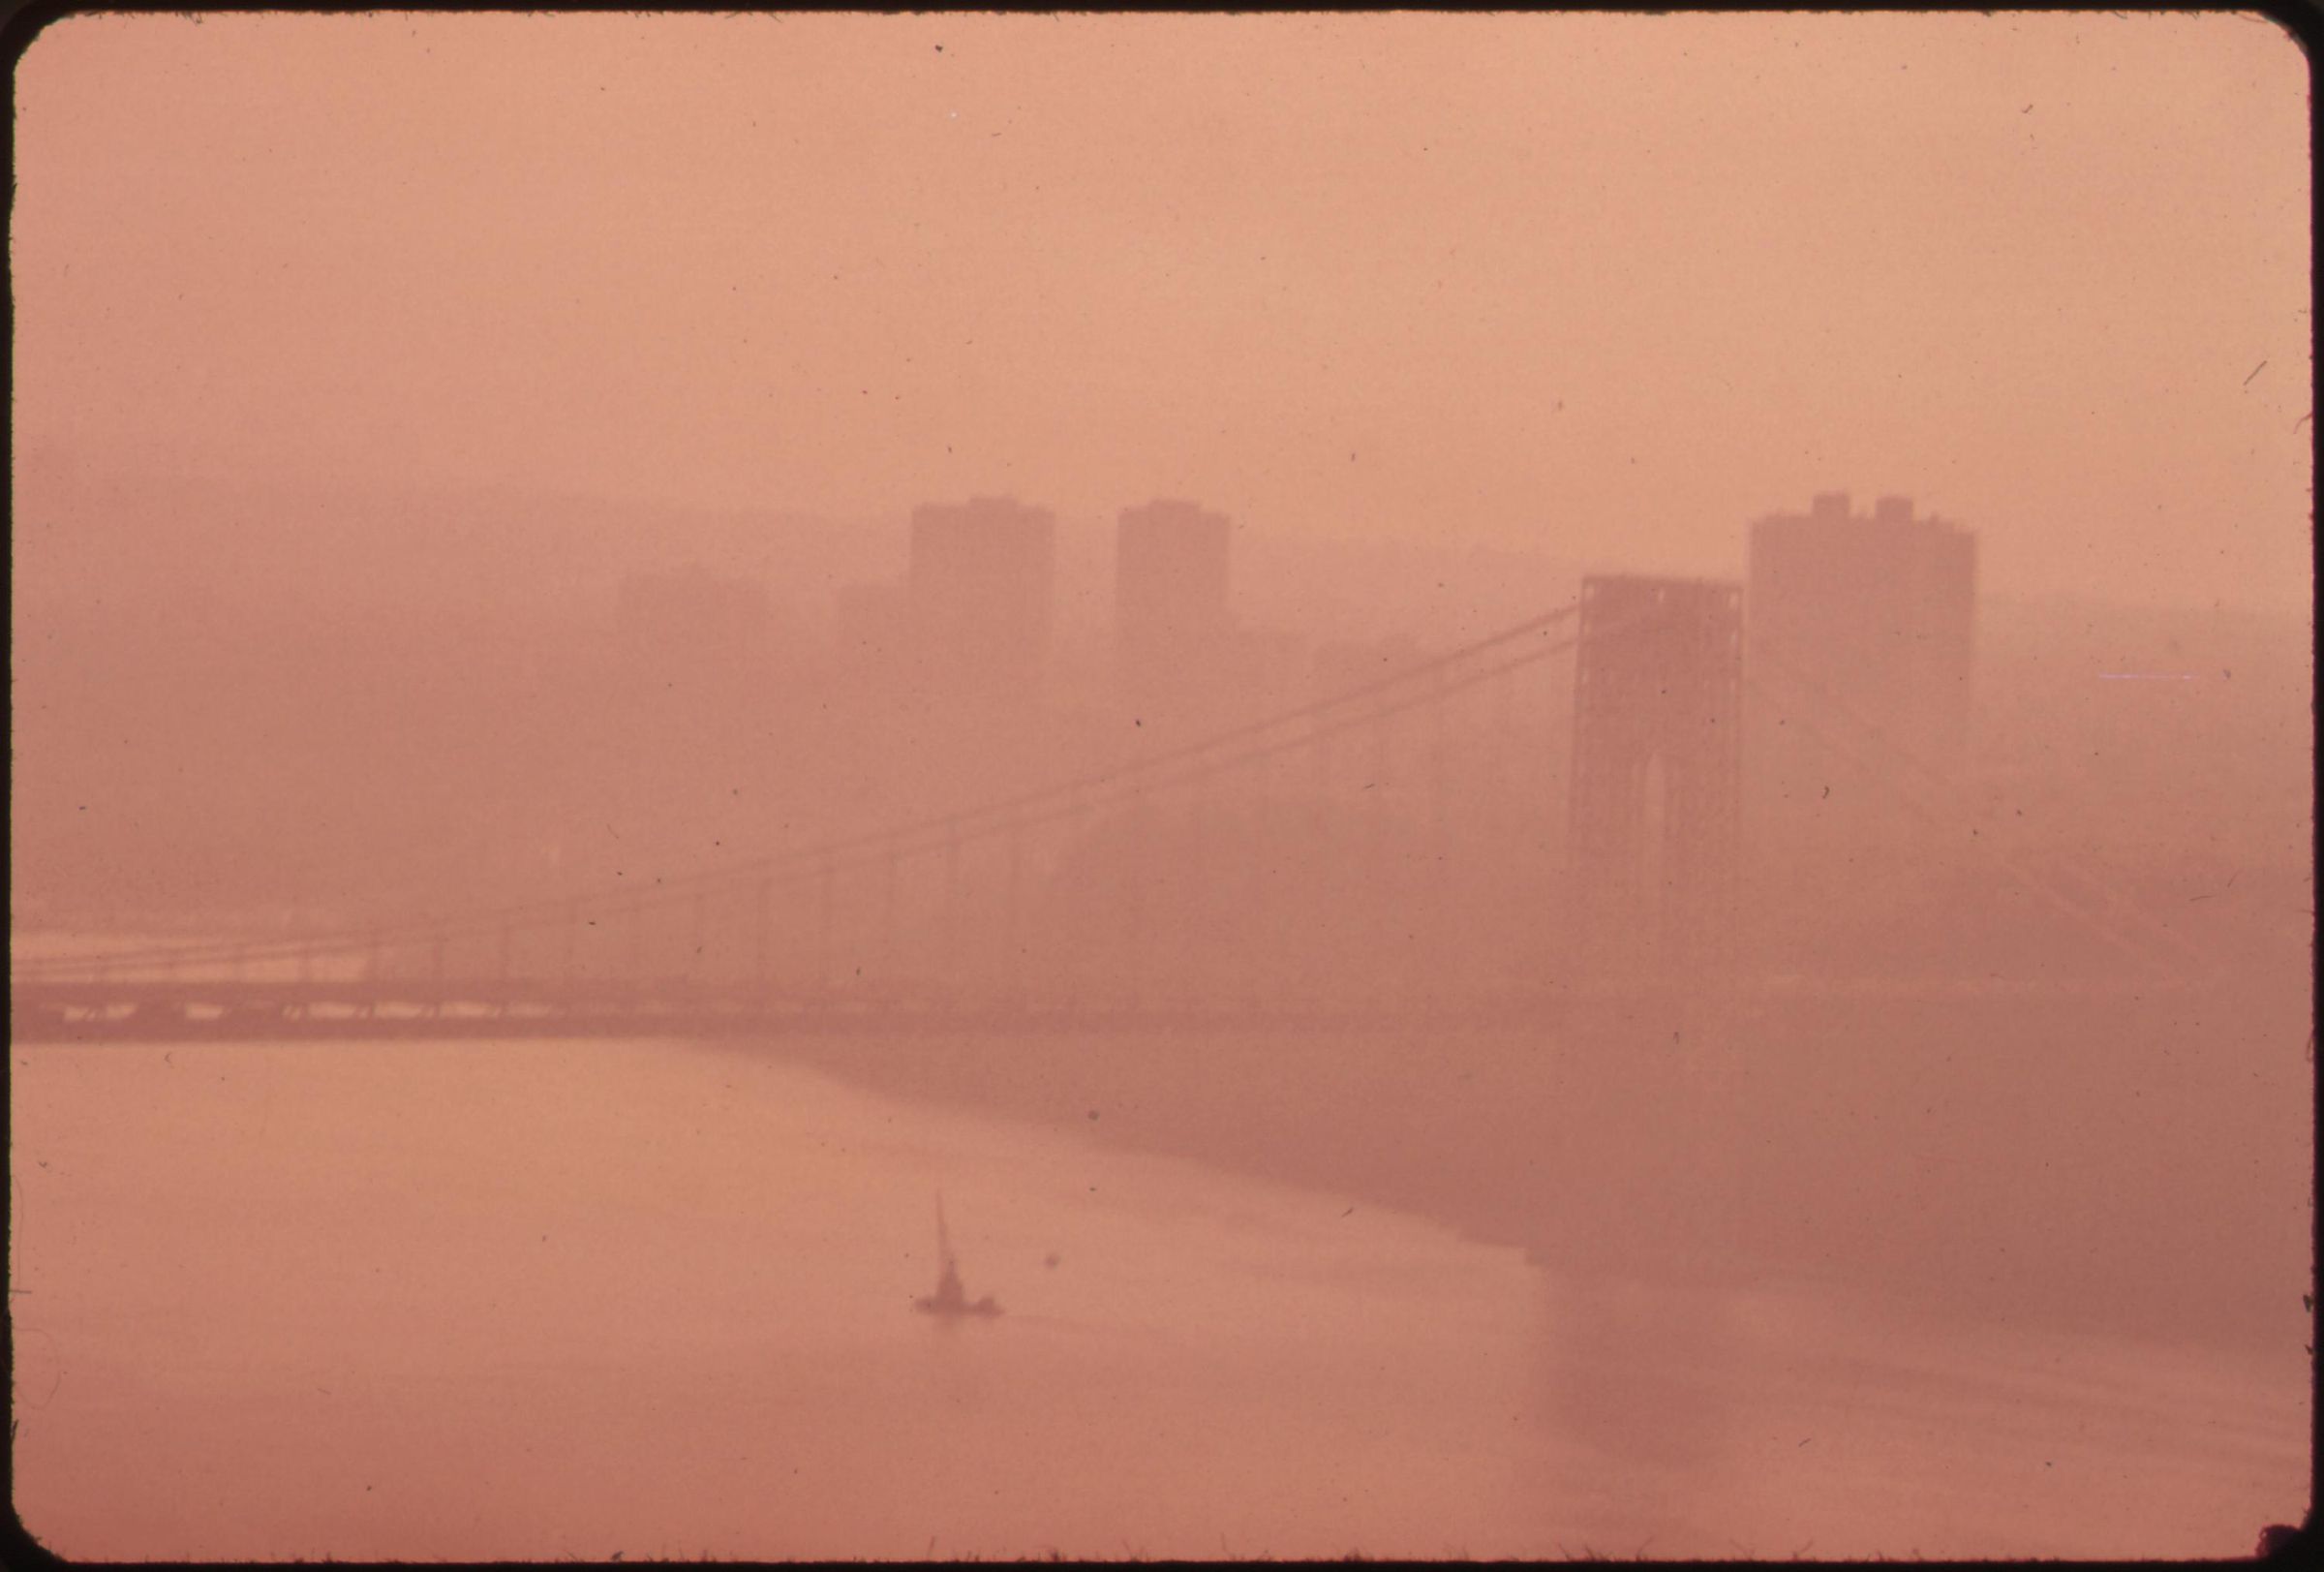 A smoggy view from the George Washington Bridge in 1973.